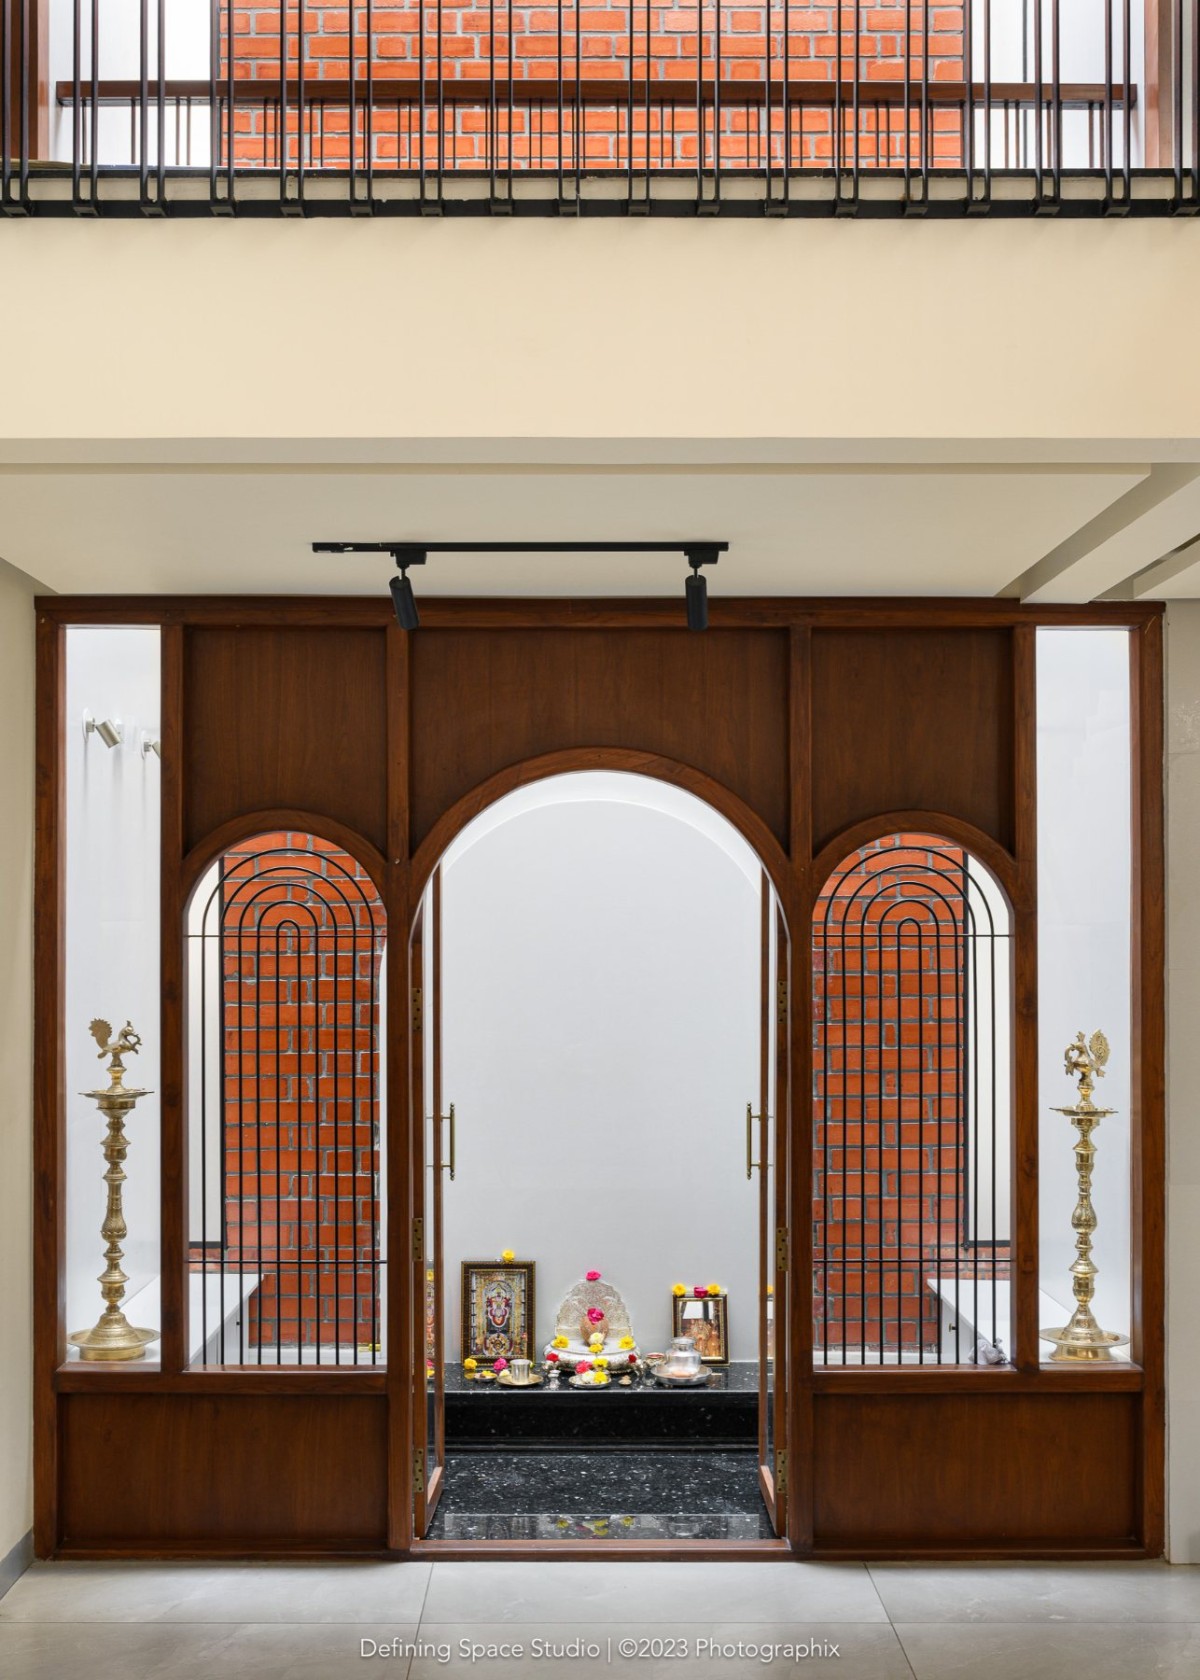 Pooja room of Anugraha by Defining Space Studio